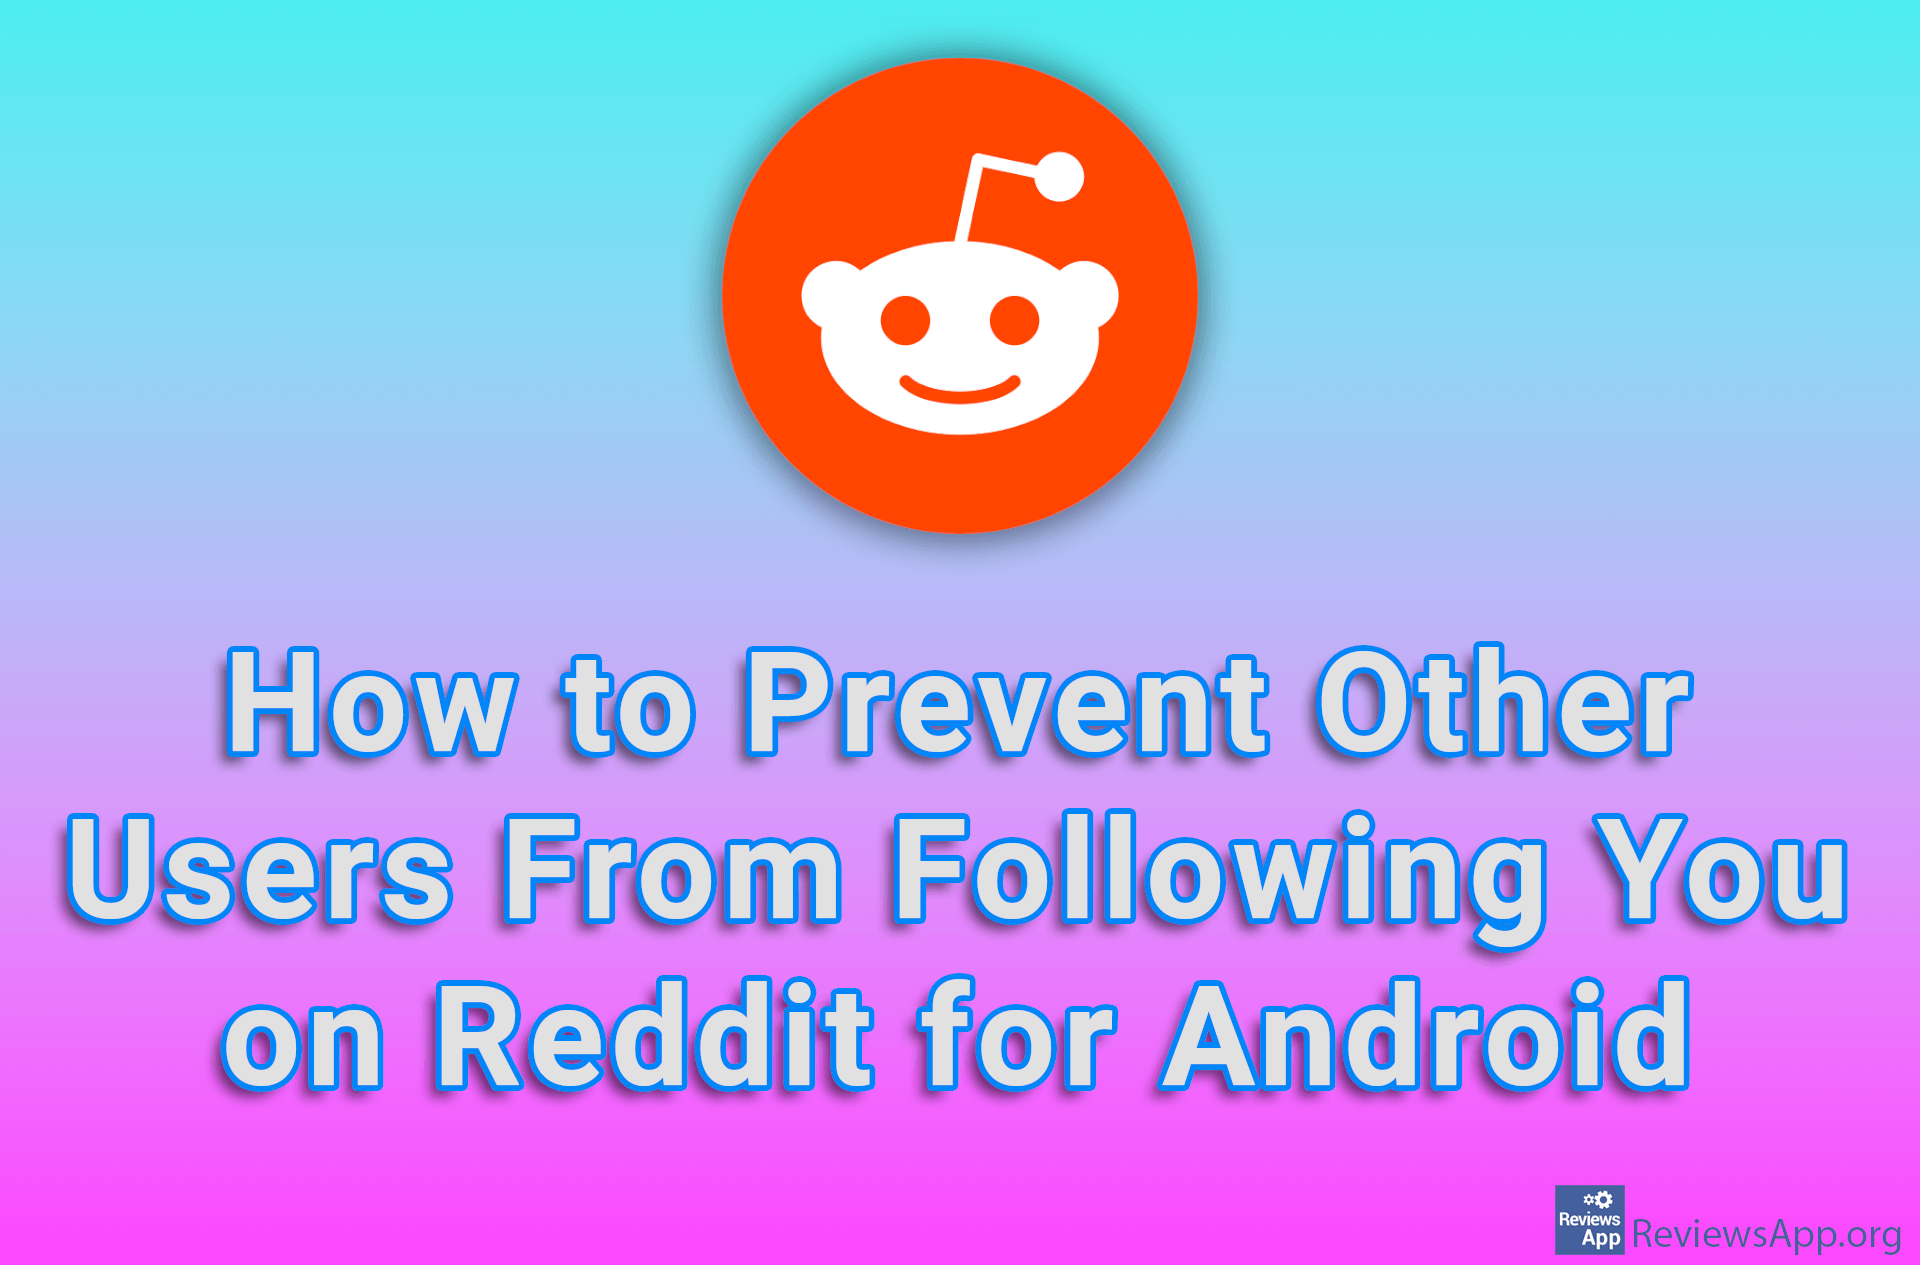 How to Prevent Other Users From Following You on Reddit for Android